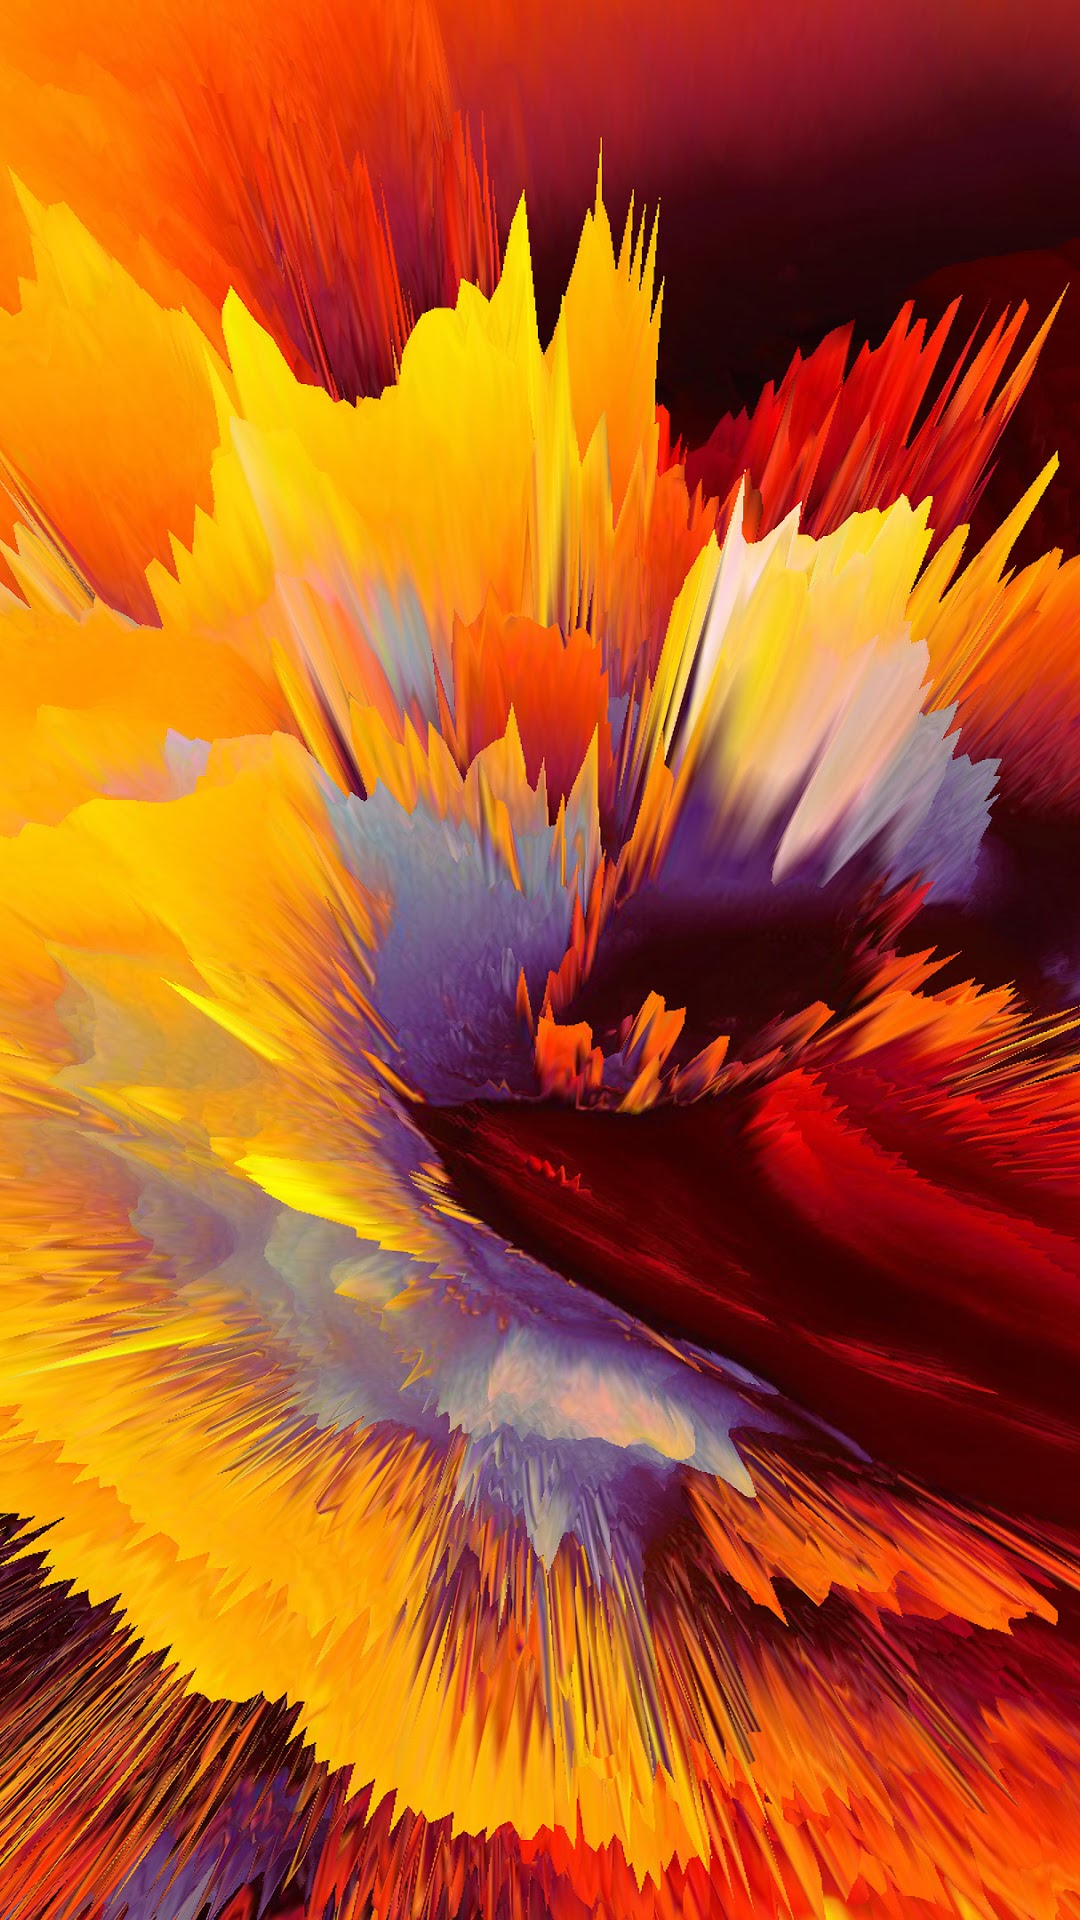 Abstract, Colorful, Explosion, 4k, 3840x2160, - Smartphone Wallpaper 4k Abstract - HD Wallpaper 